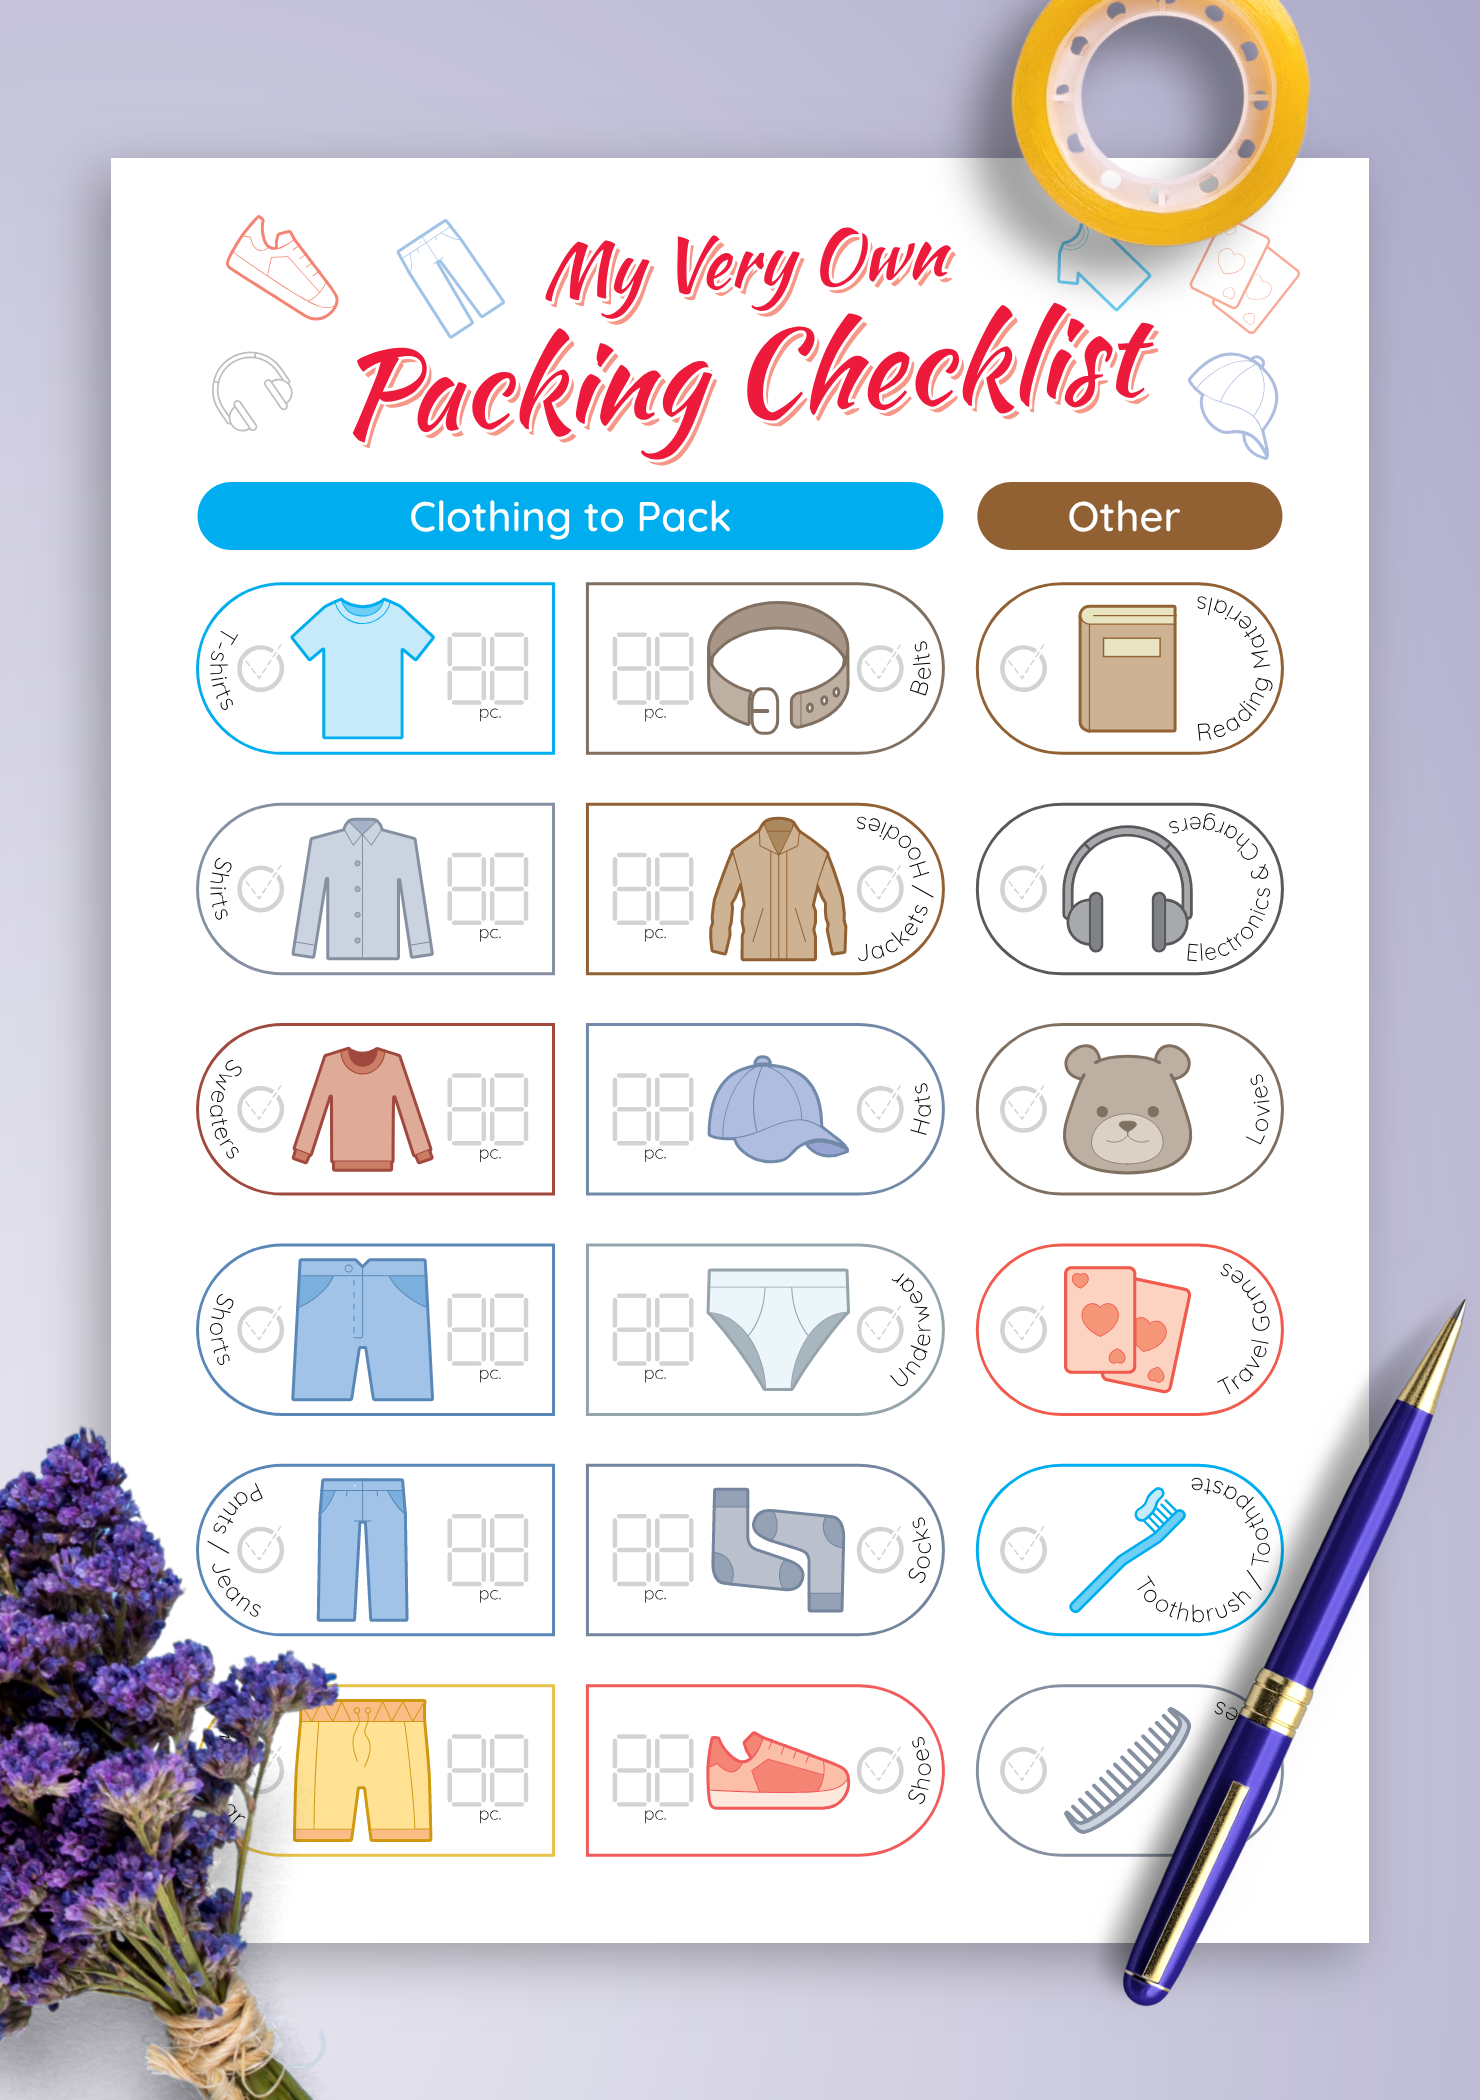 https://onplanners.com/sites/default/files/styles/template_fancy/public/template-images/printable-packing-checklist-boy-template.png